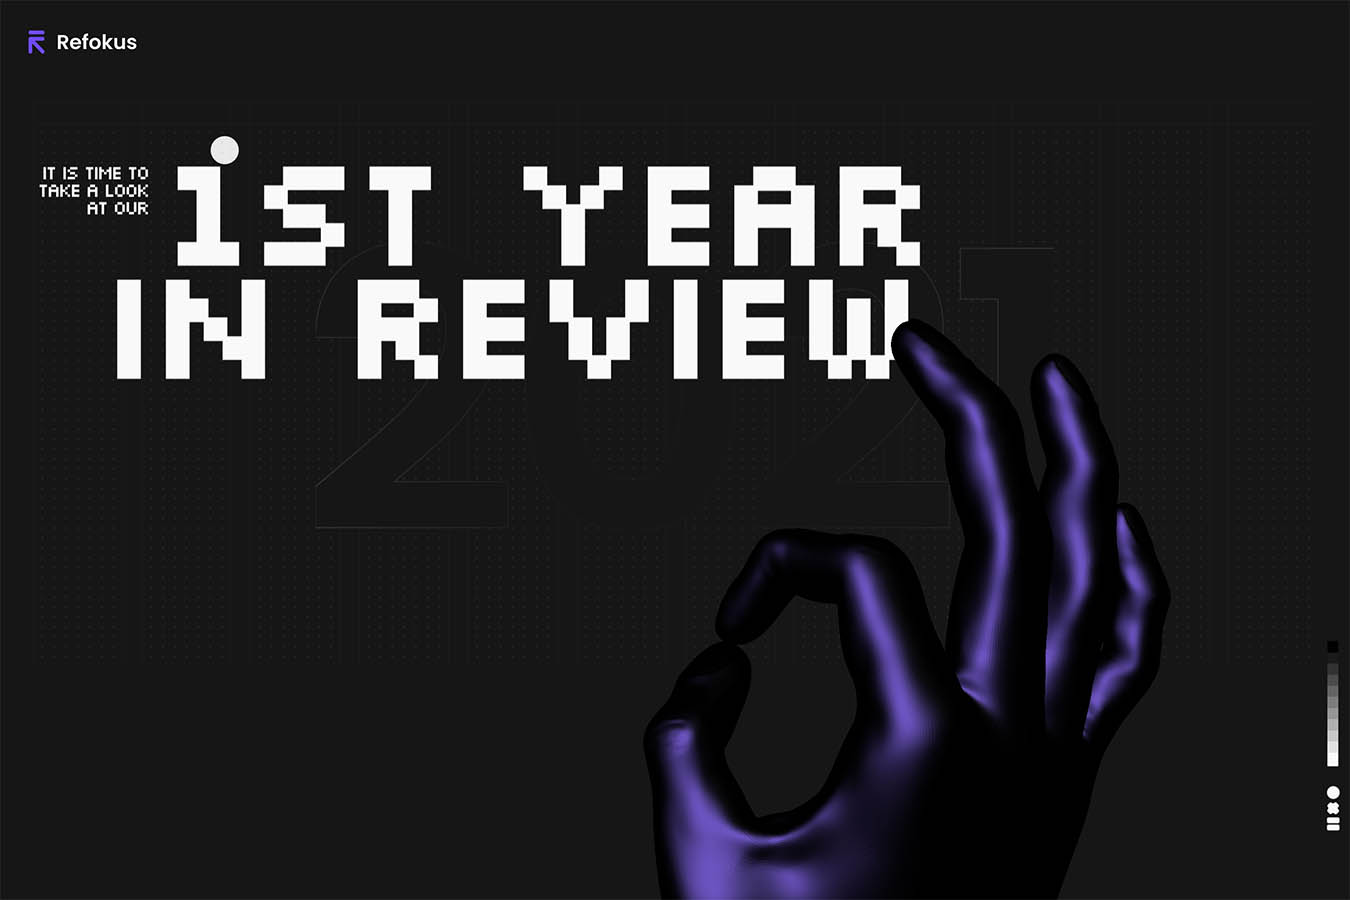 Refokus 2021 Year in Review
